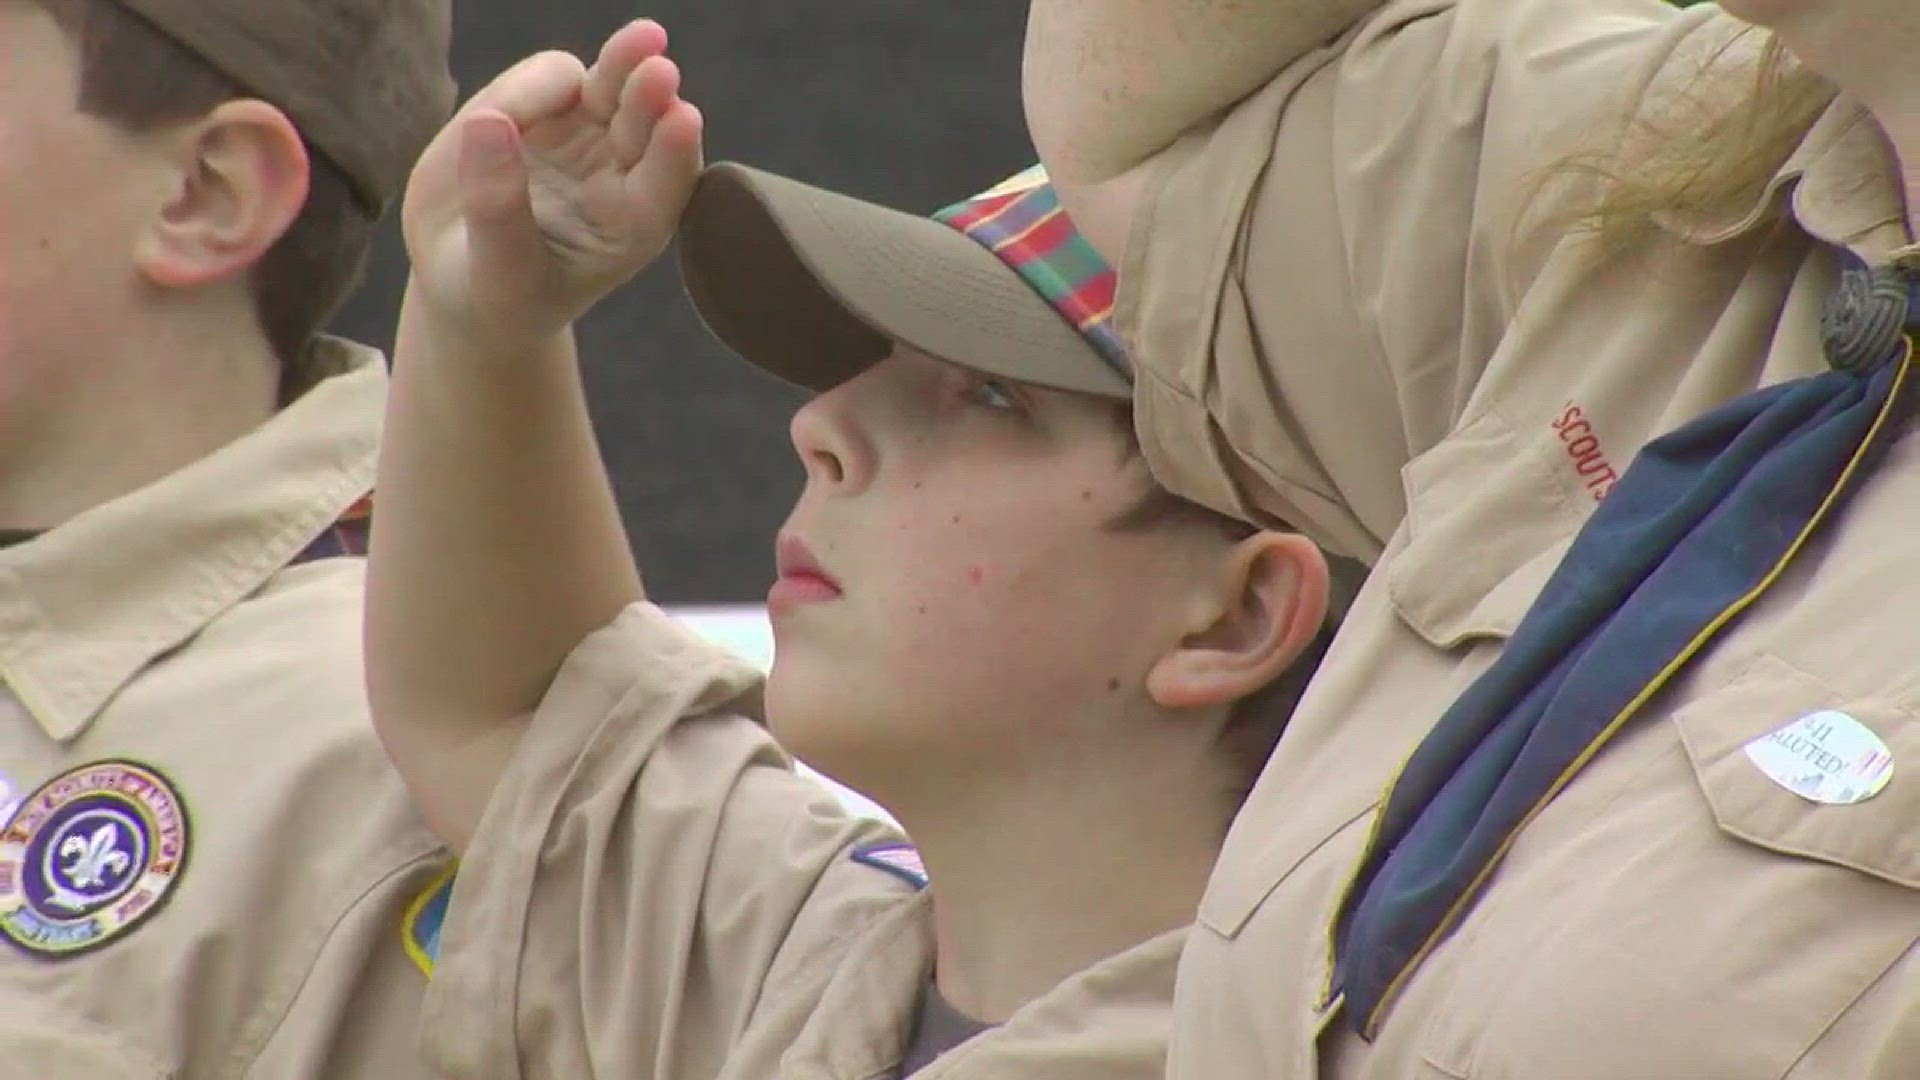 From sunrise to sunset the Boy Scouts of America will lead the community in a day-long “Scout Salute” at the Ford Presidential Museum.